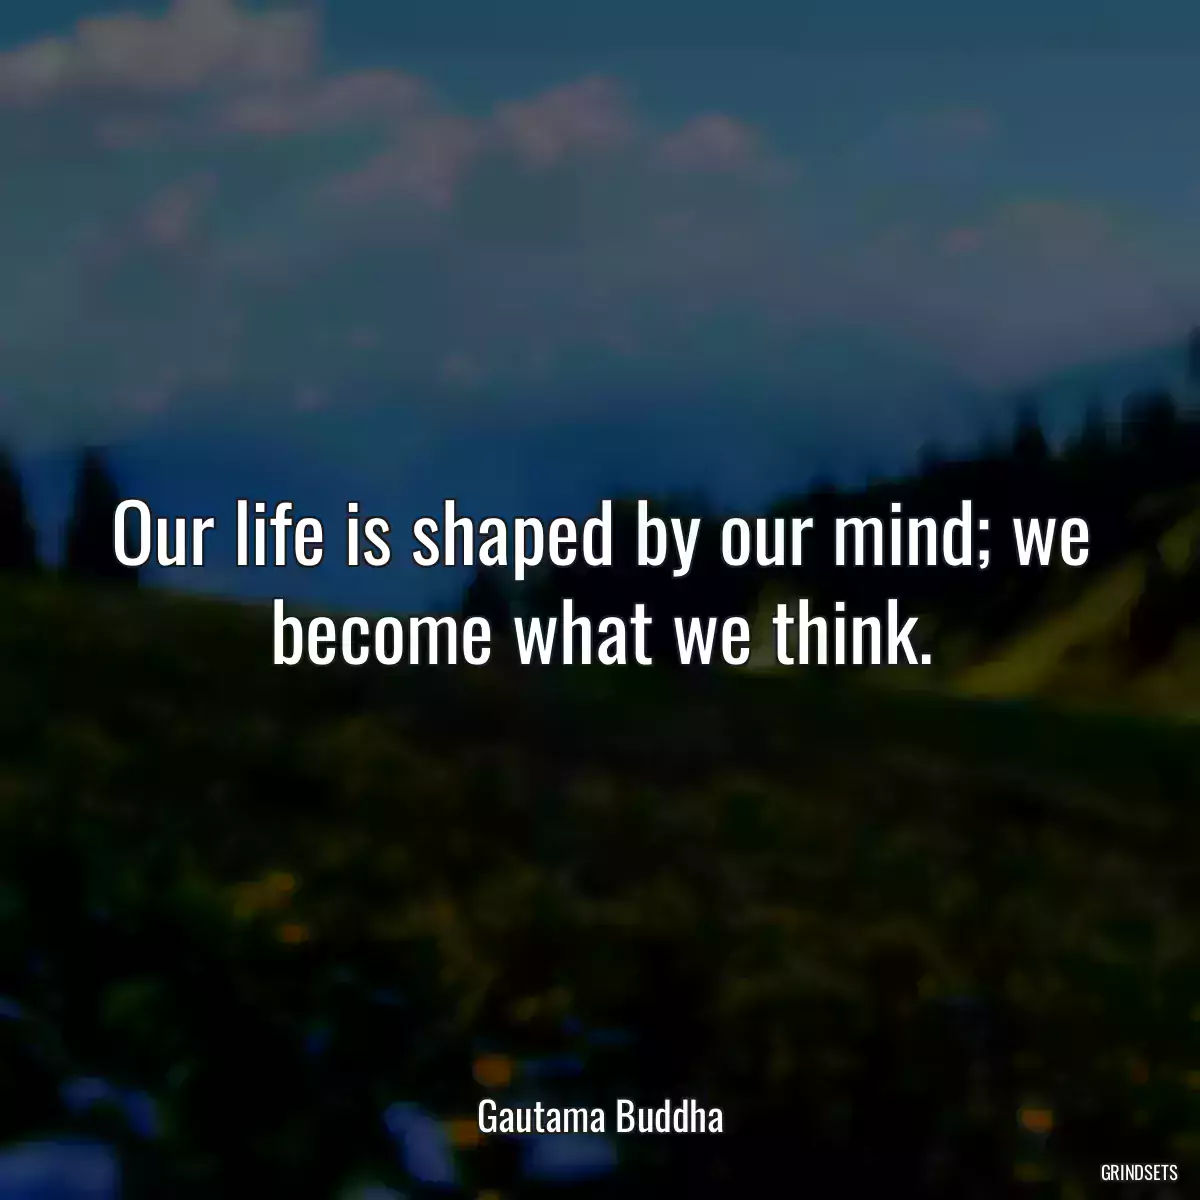 Our life is shaped by our mind; we become what we think.